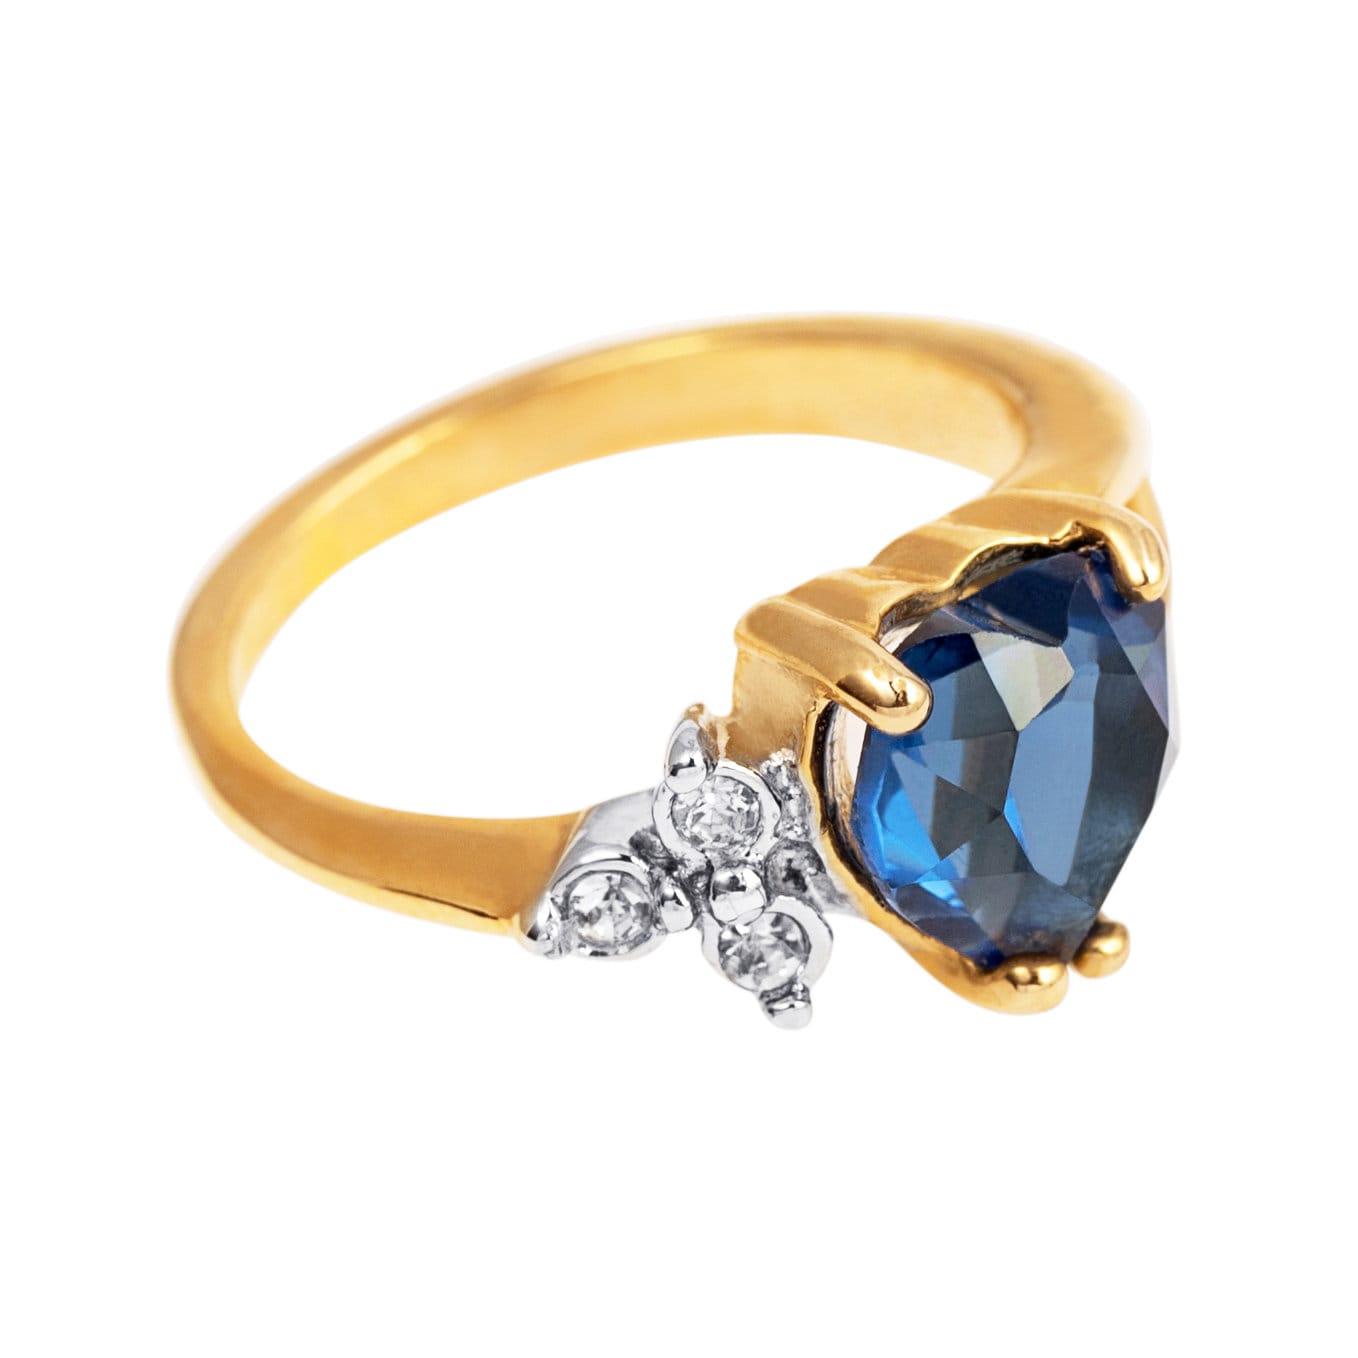 Vintage Ring Sapphire Cubic Zirconia and Clear Swarovski Crystals 18kt Gold Antique Womans Jewelry Heart Promise Rings #R1936-SY